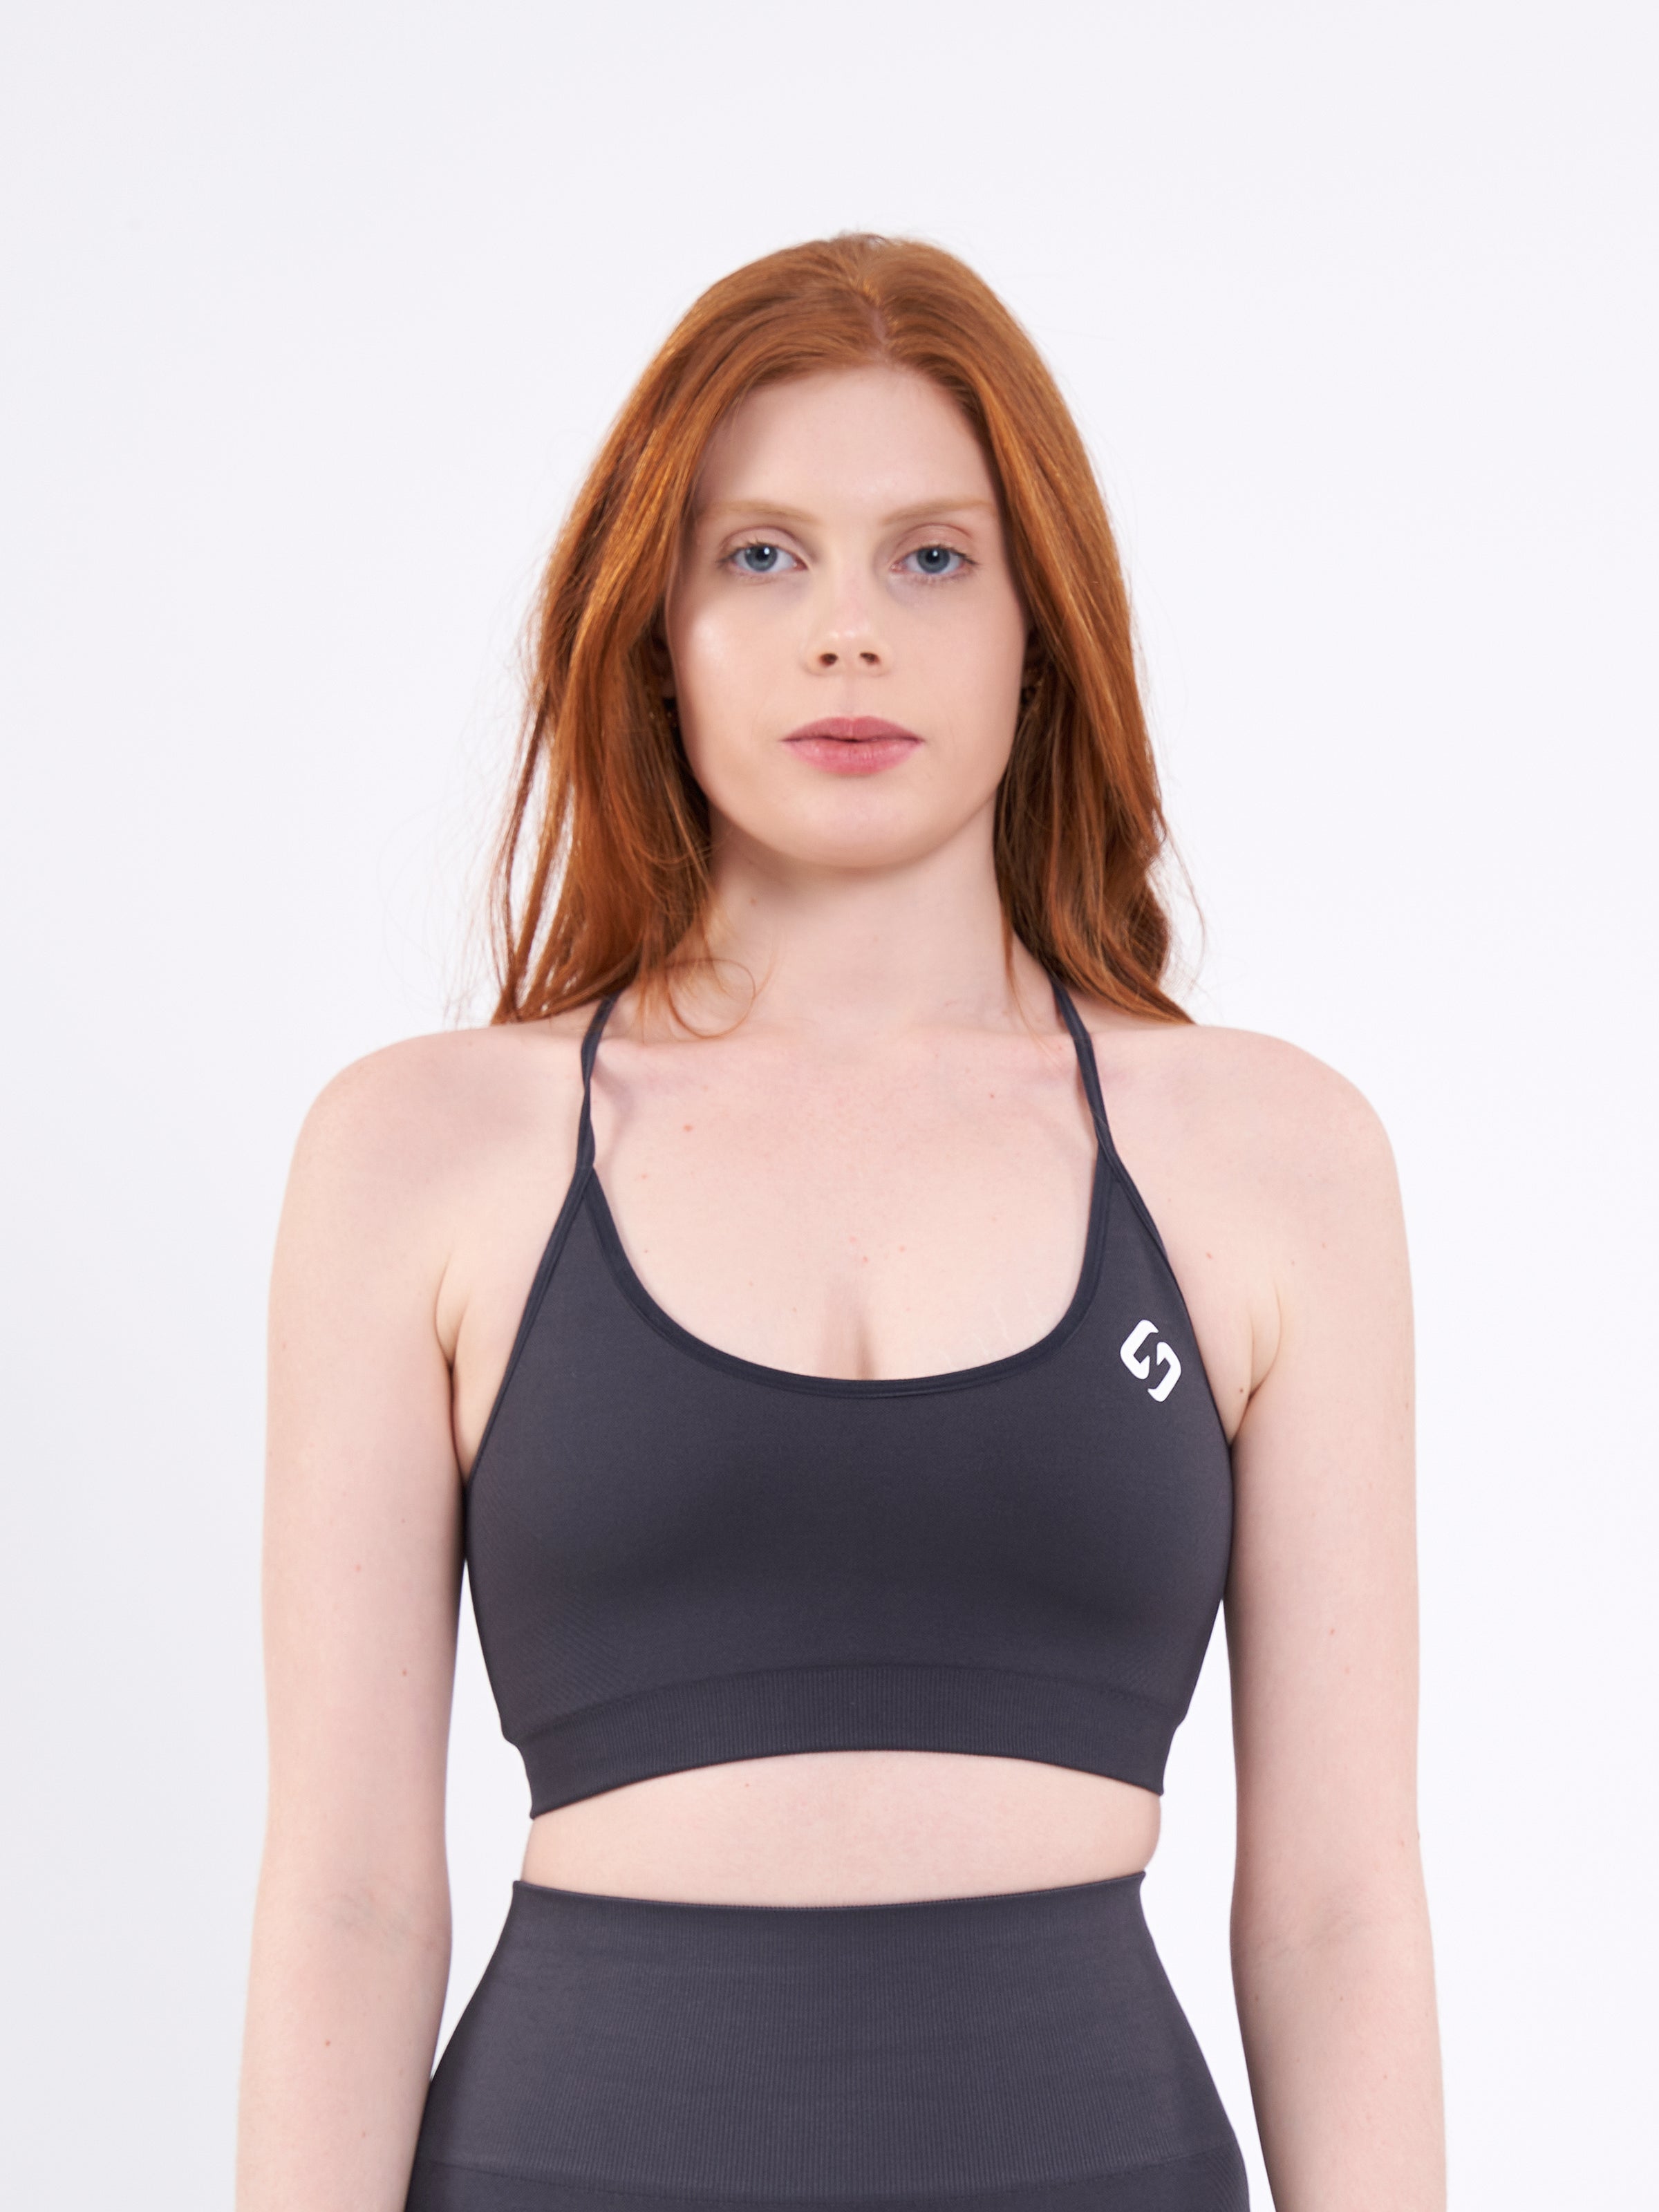  ION Cheer Aspire Flexion Sports Bra for Women and